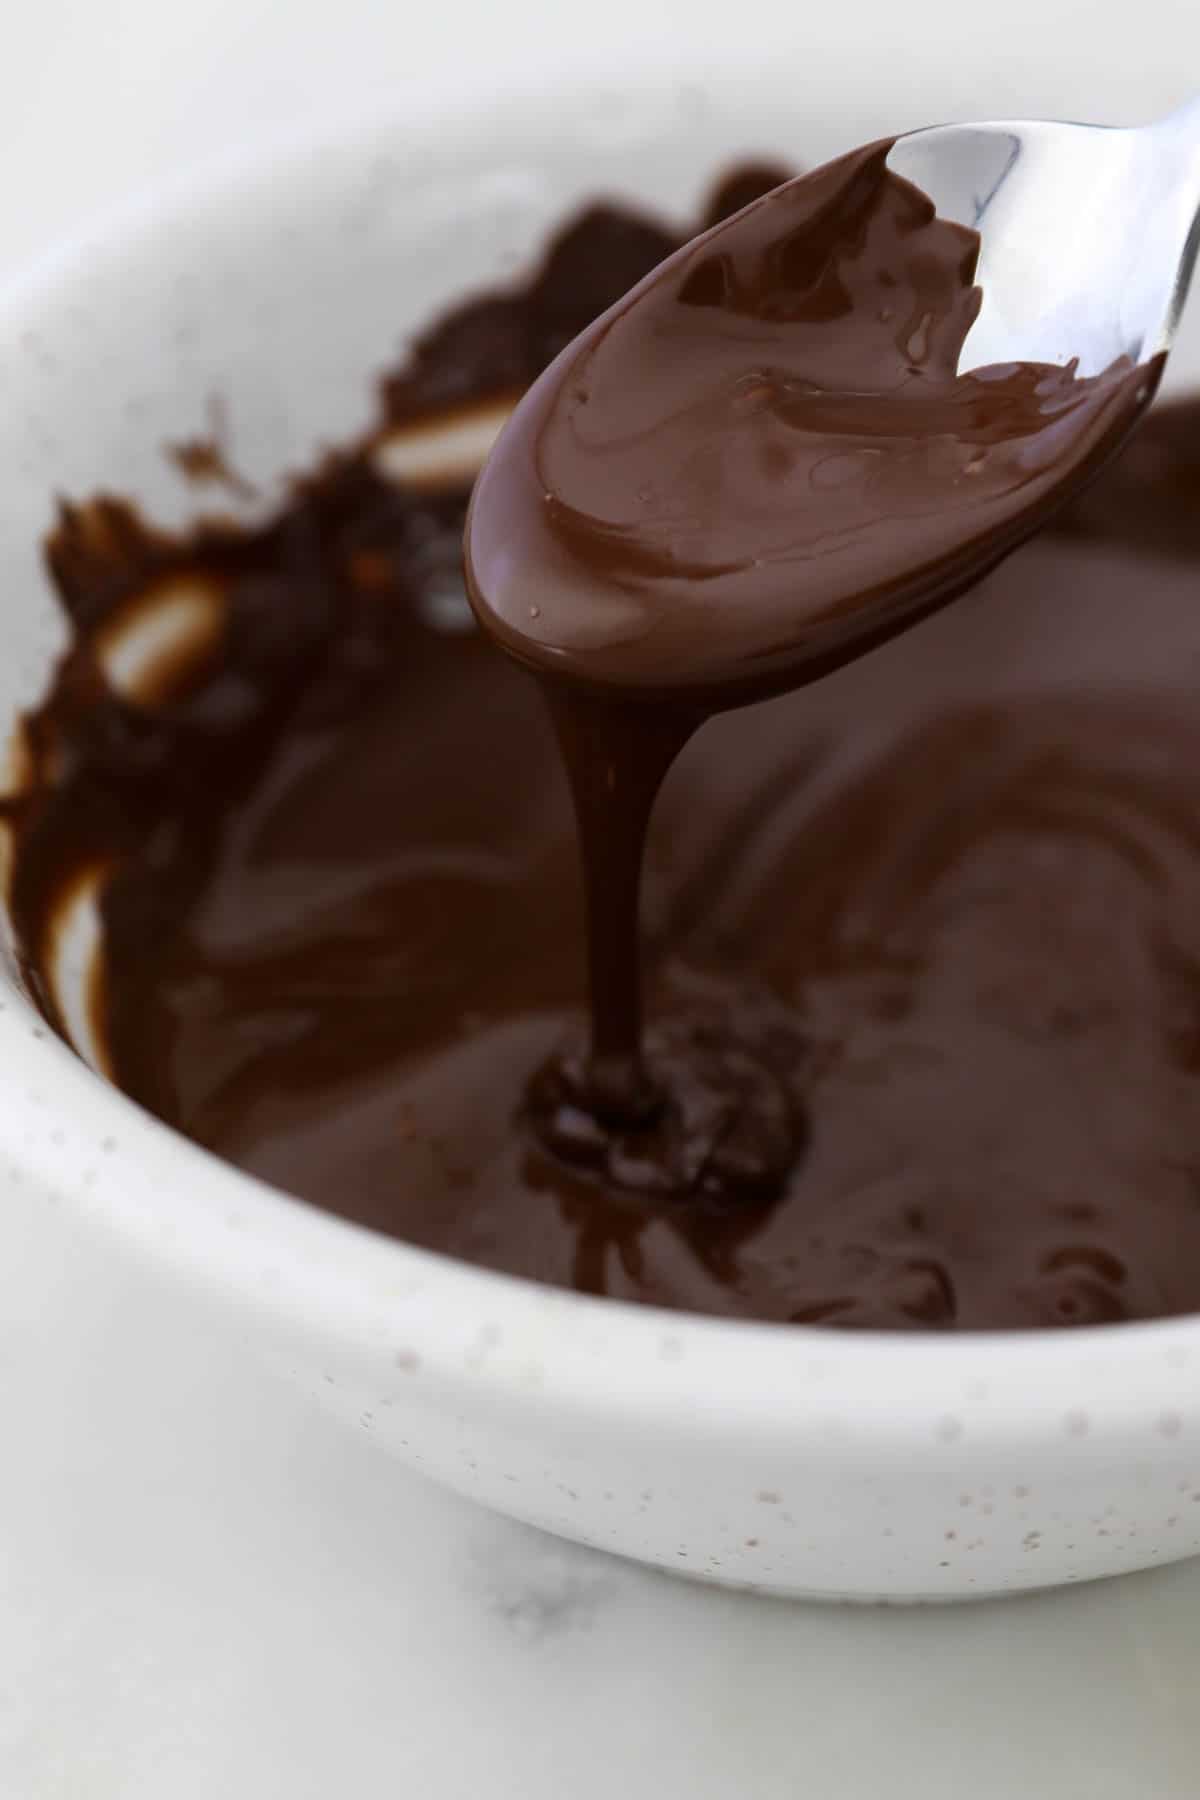 Melted chocolate drips from a spoon into a bowl of melted dark chocolate.